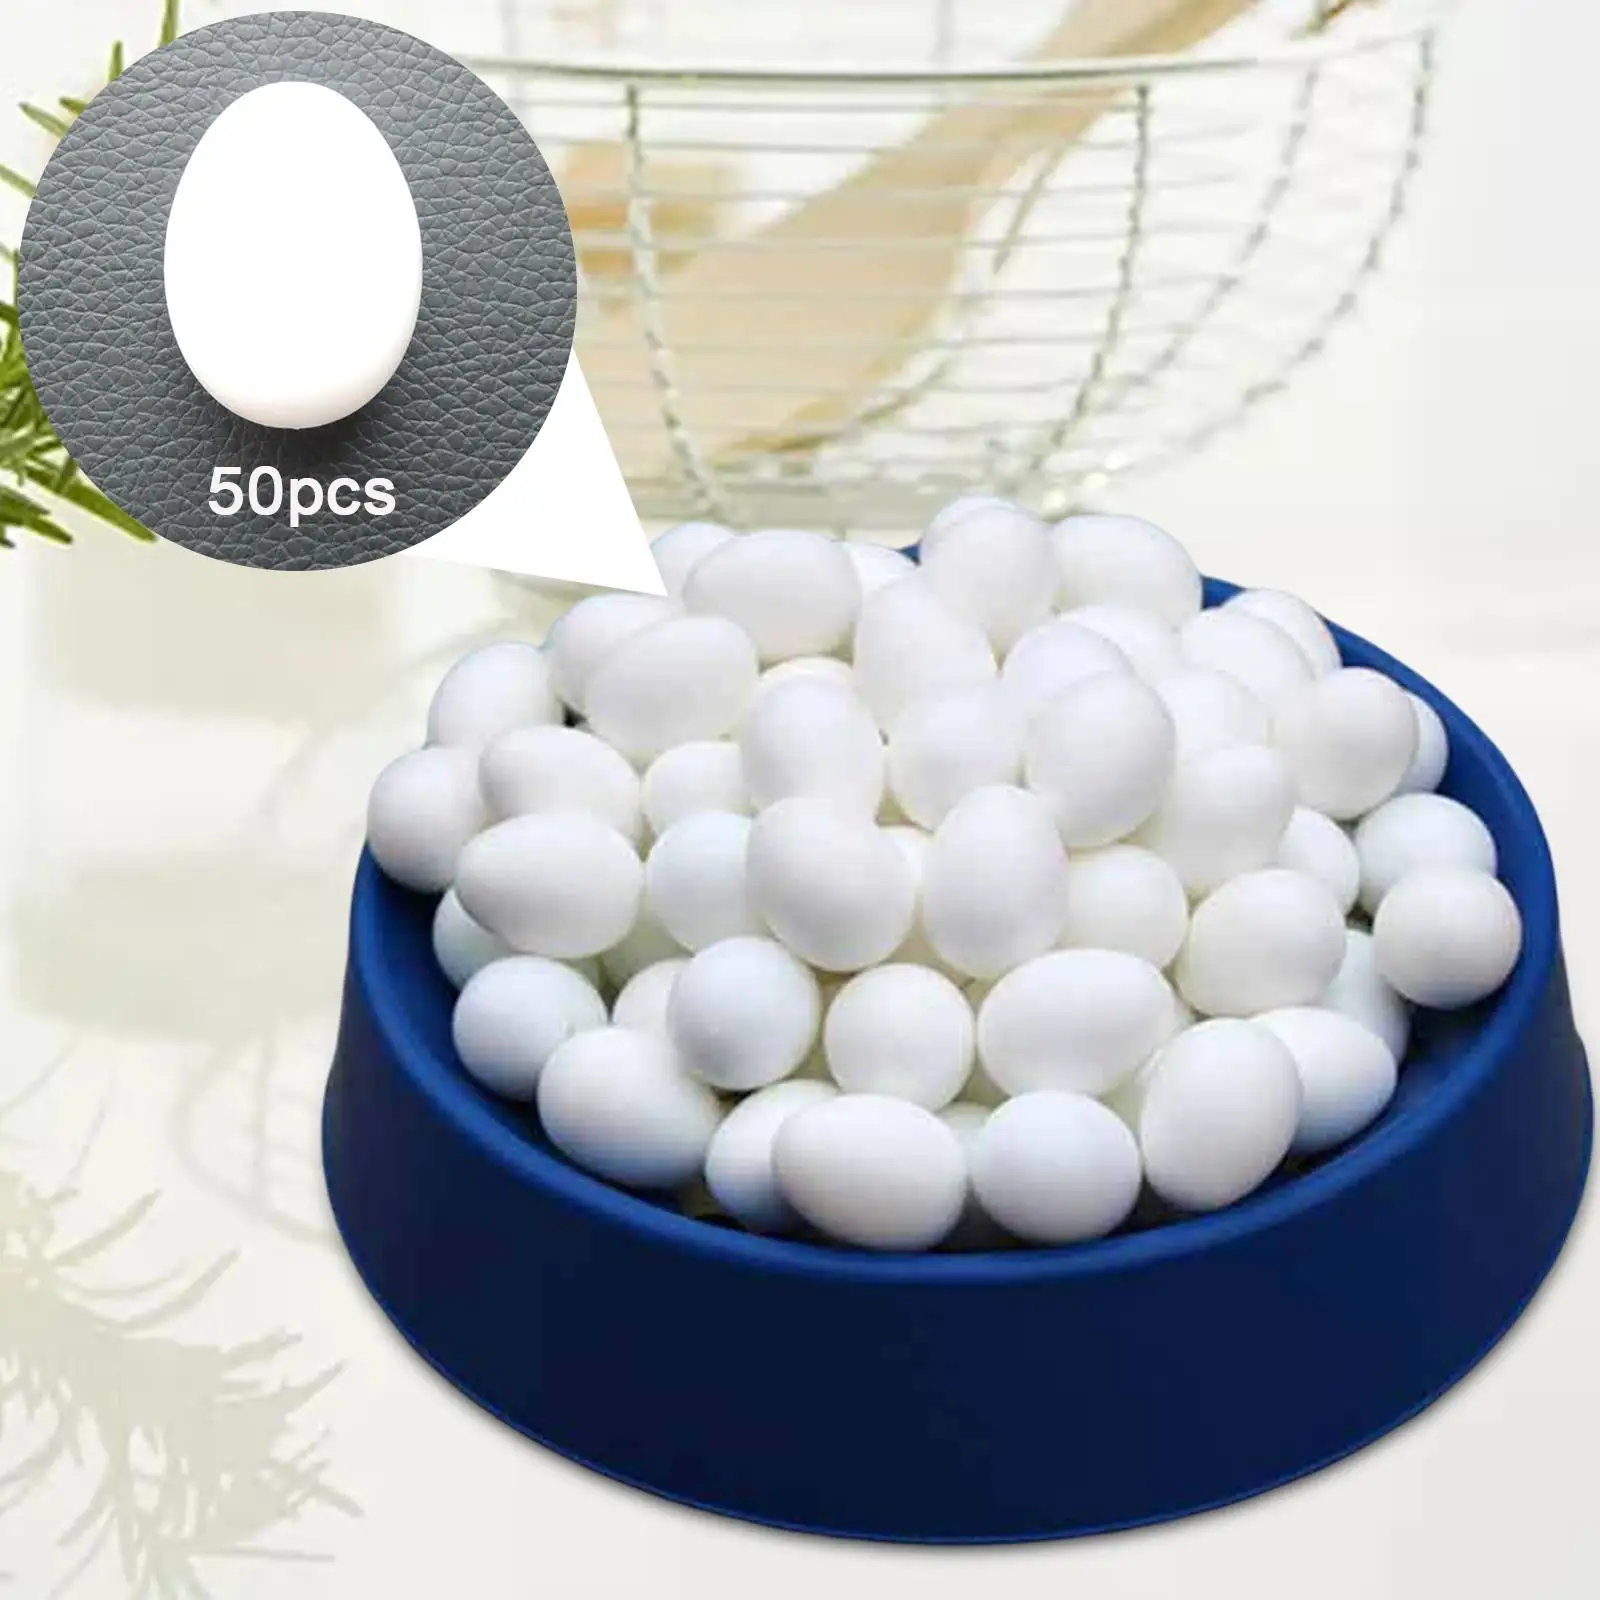 50x Plastic Pigeon Eggs Simulation Artificial Fake False Dummy Eggs for Hatching Supplies Racing Pigeons